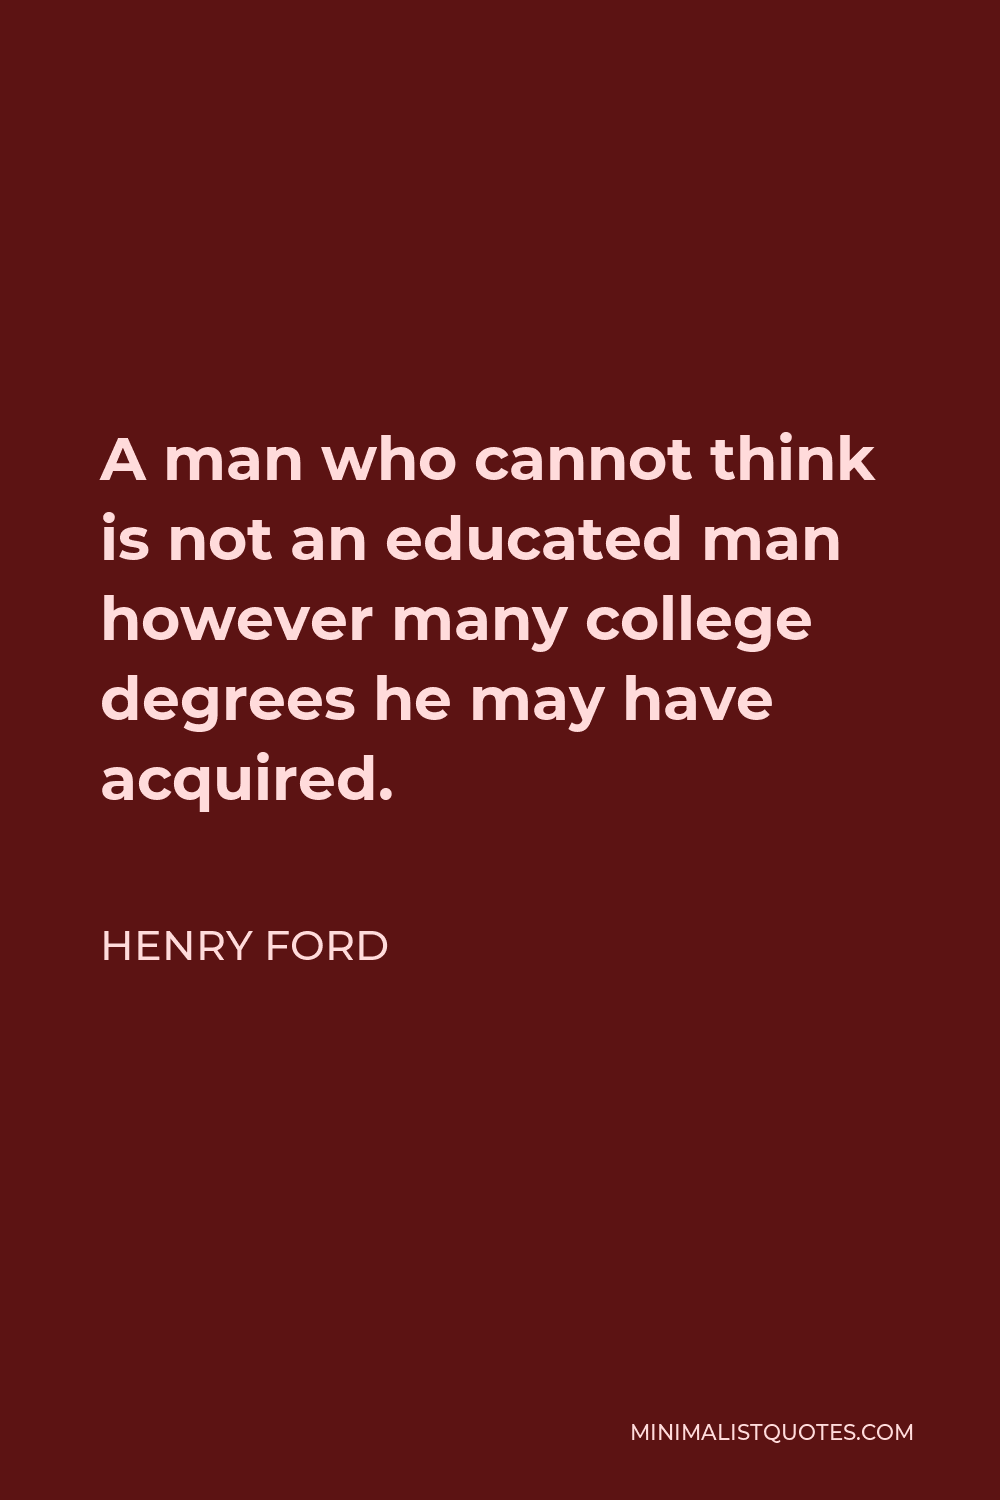 Henry Ford Quote - A man who cannot think is not an educated man however many college degrees he may have acquired.